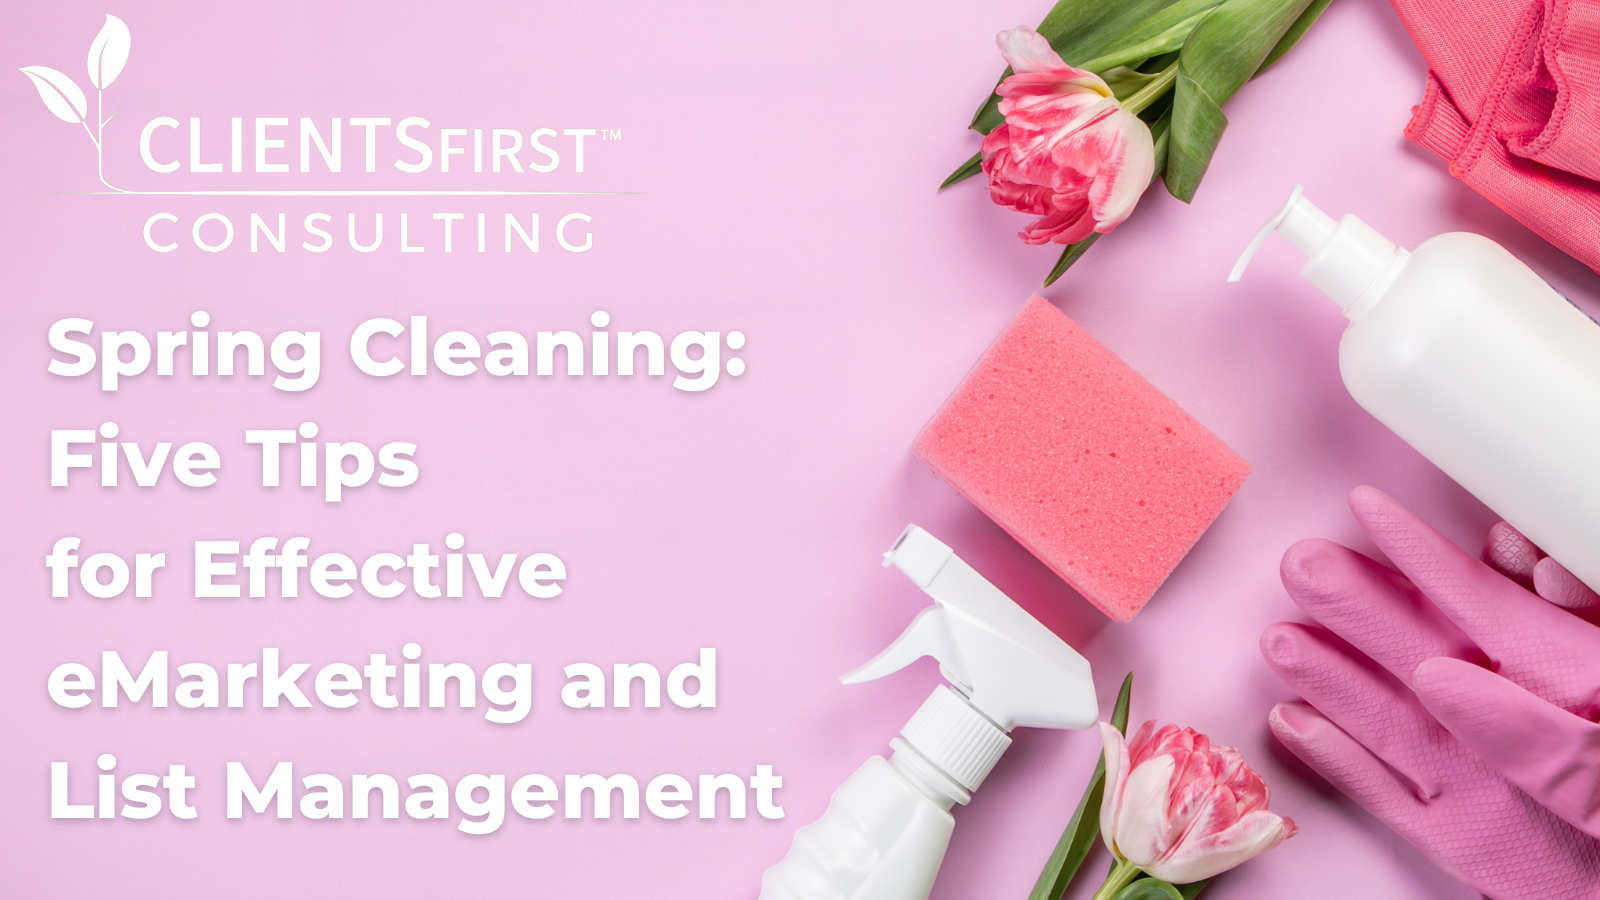 Spring Cleaning: Five Tips for Effective eMarketing and List Management